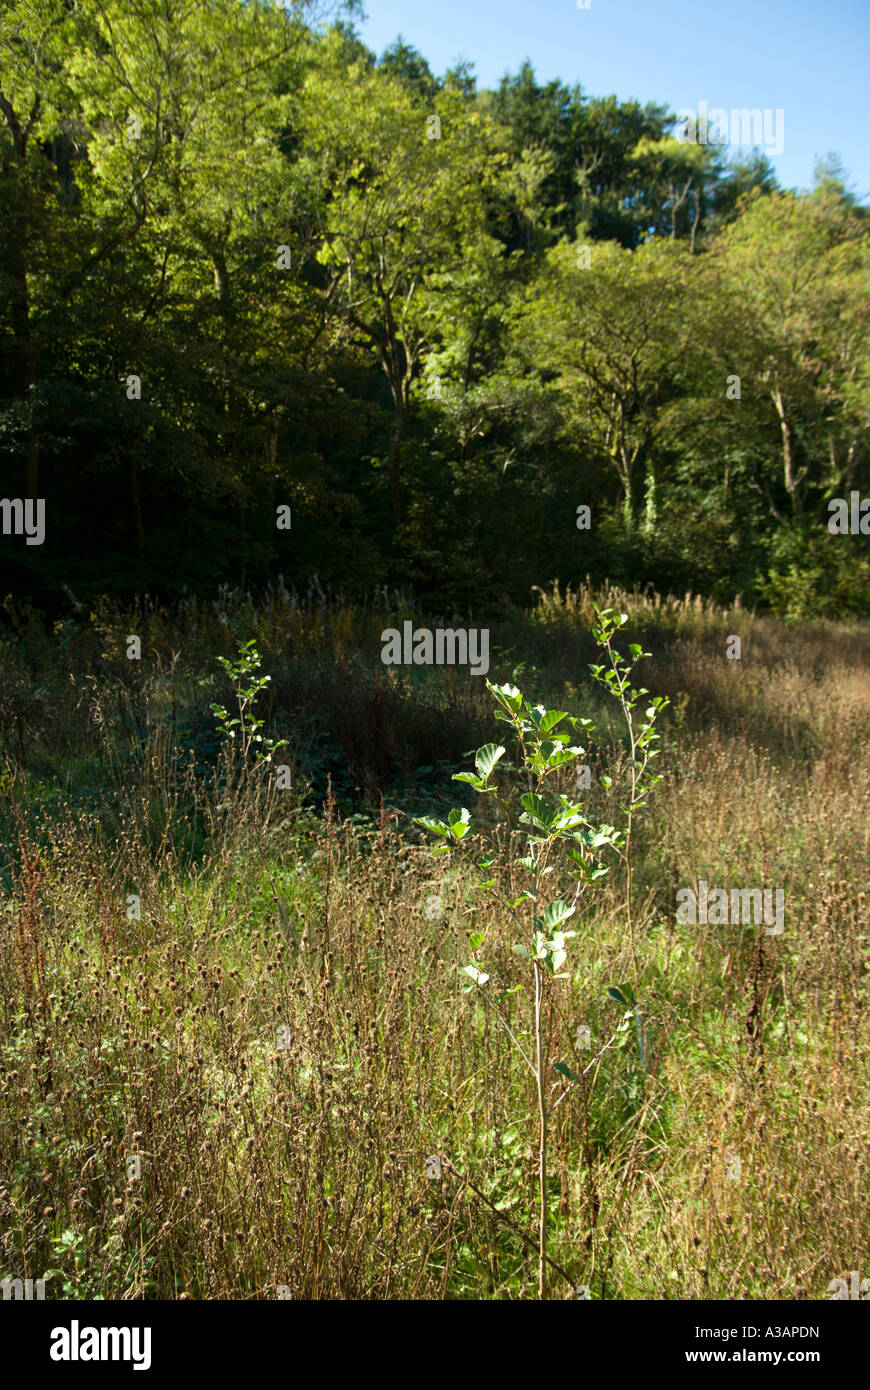 Expansion of wet woodland habitat -  planting of Alder, Alnus glutinosa in a field, Wales, UK Stock Photo